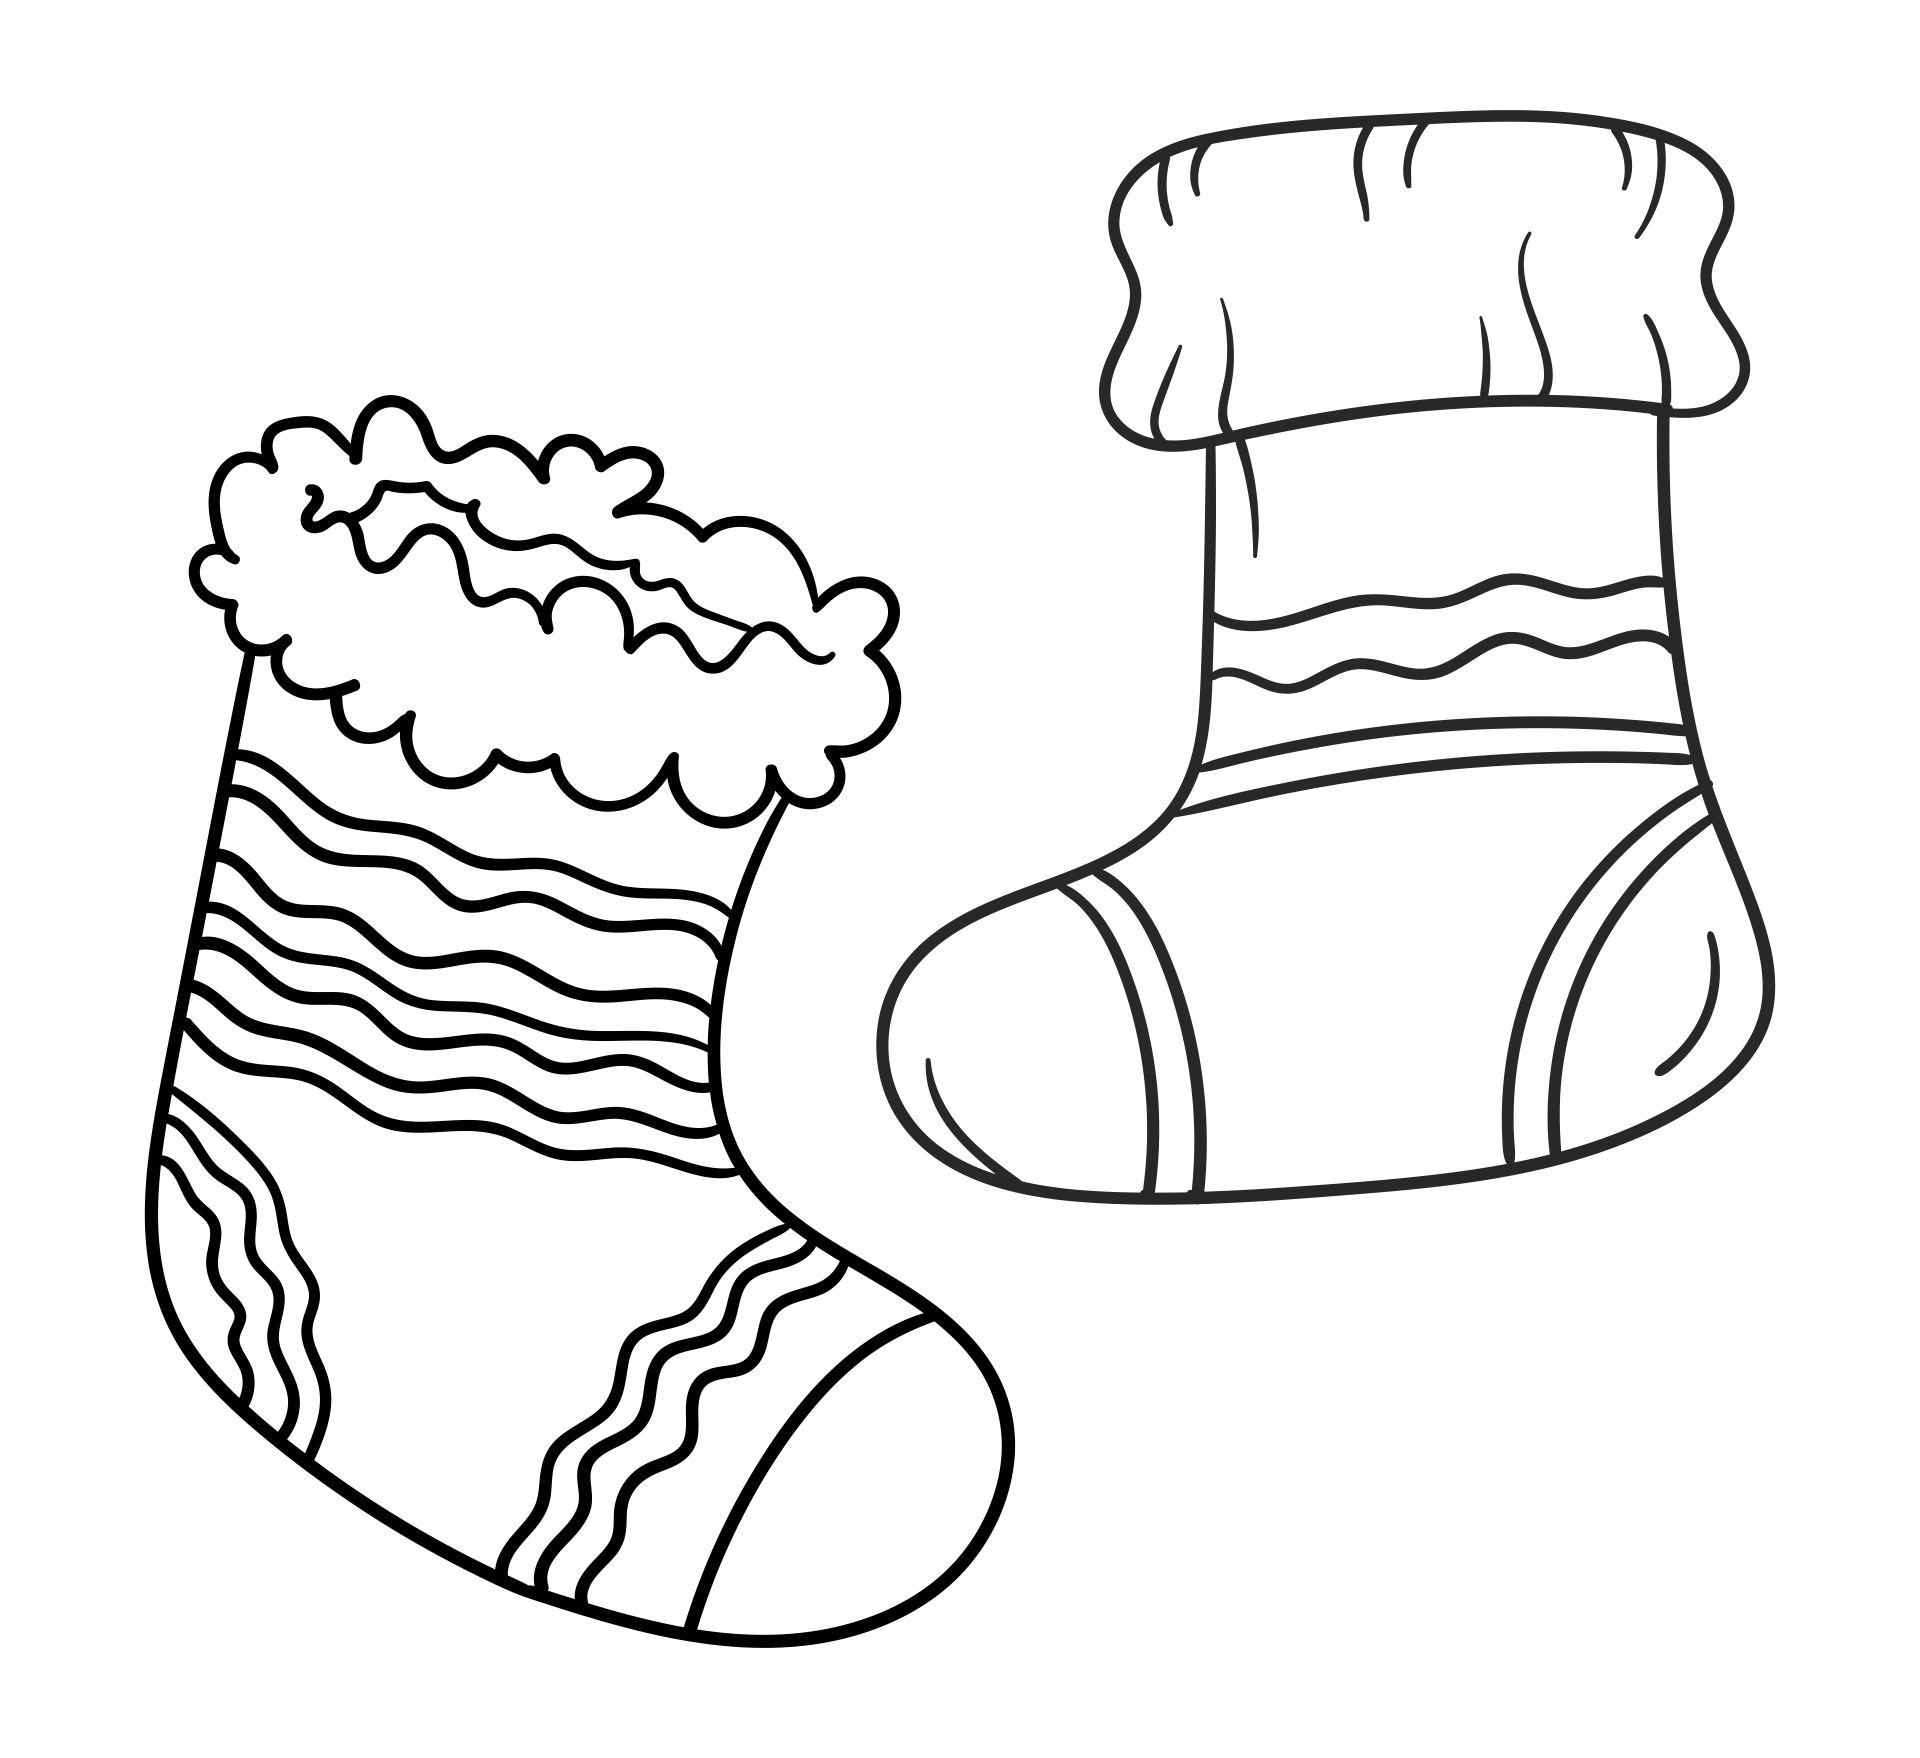 15 Best Christmas Stocking Coloring Pages Printable PDF for Free at ...